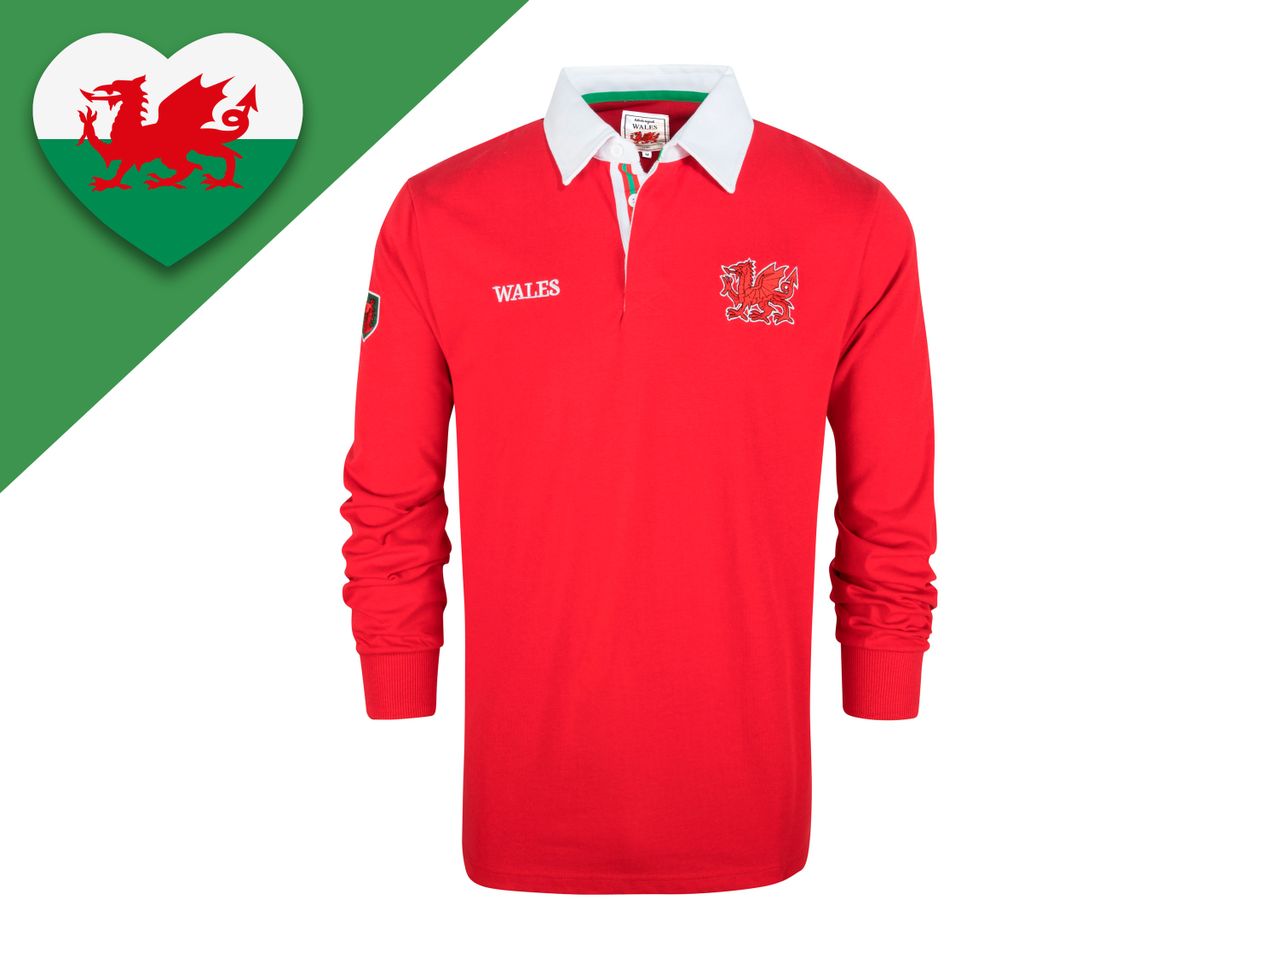 Go to full screen view: Adults’ Wales Rugby Shirt - Image 1